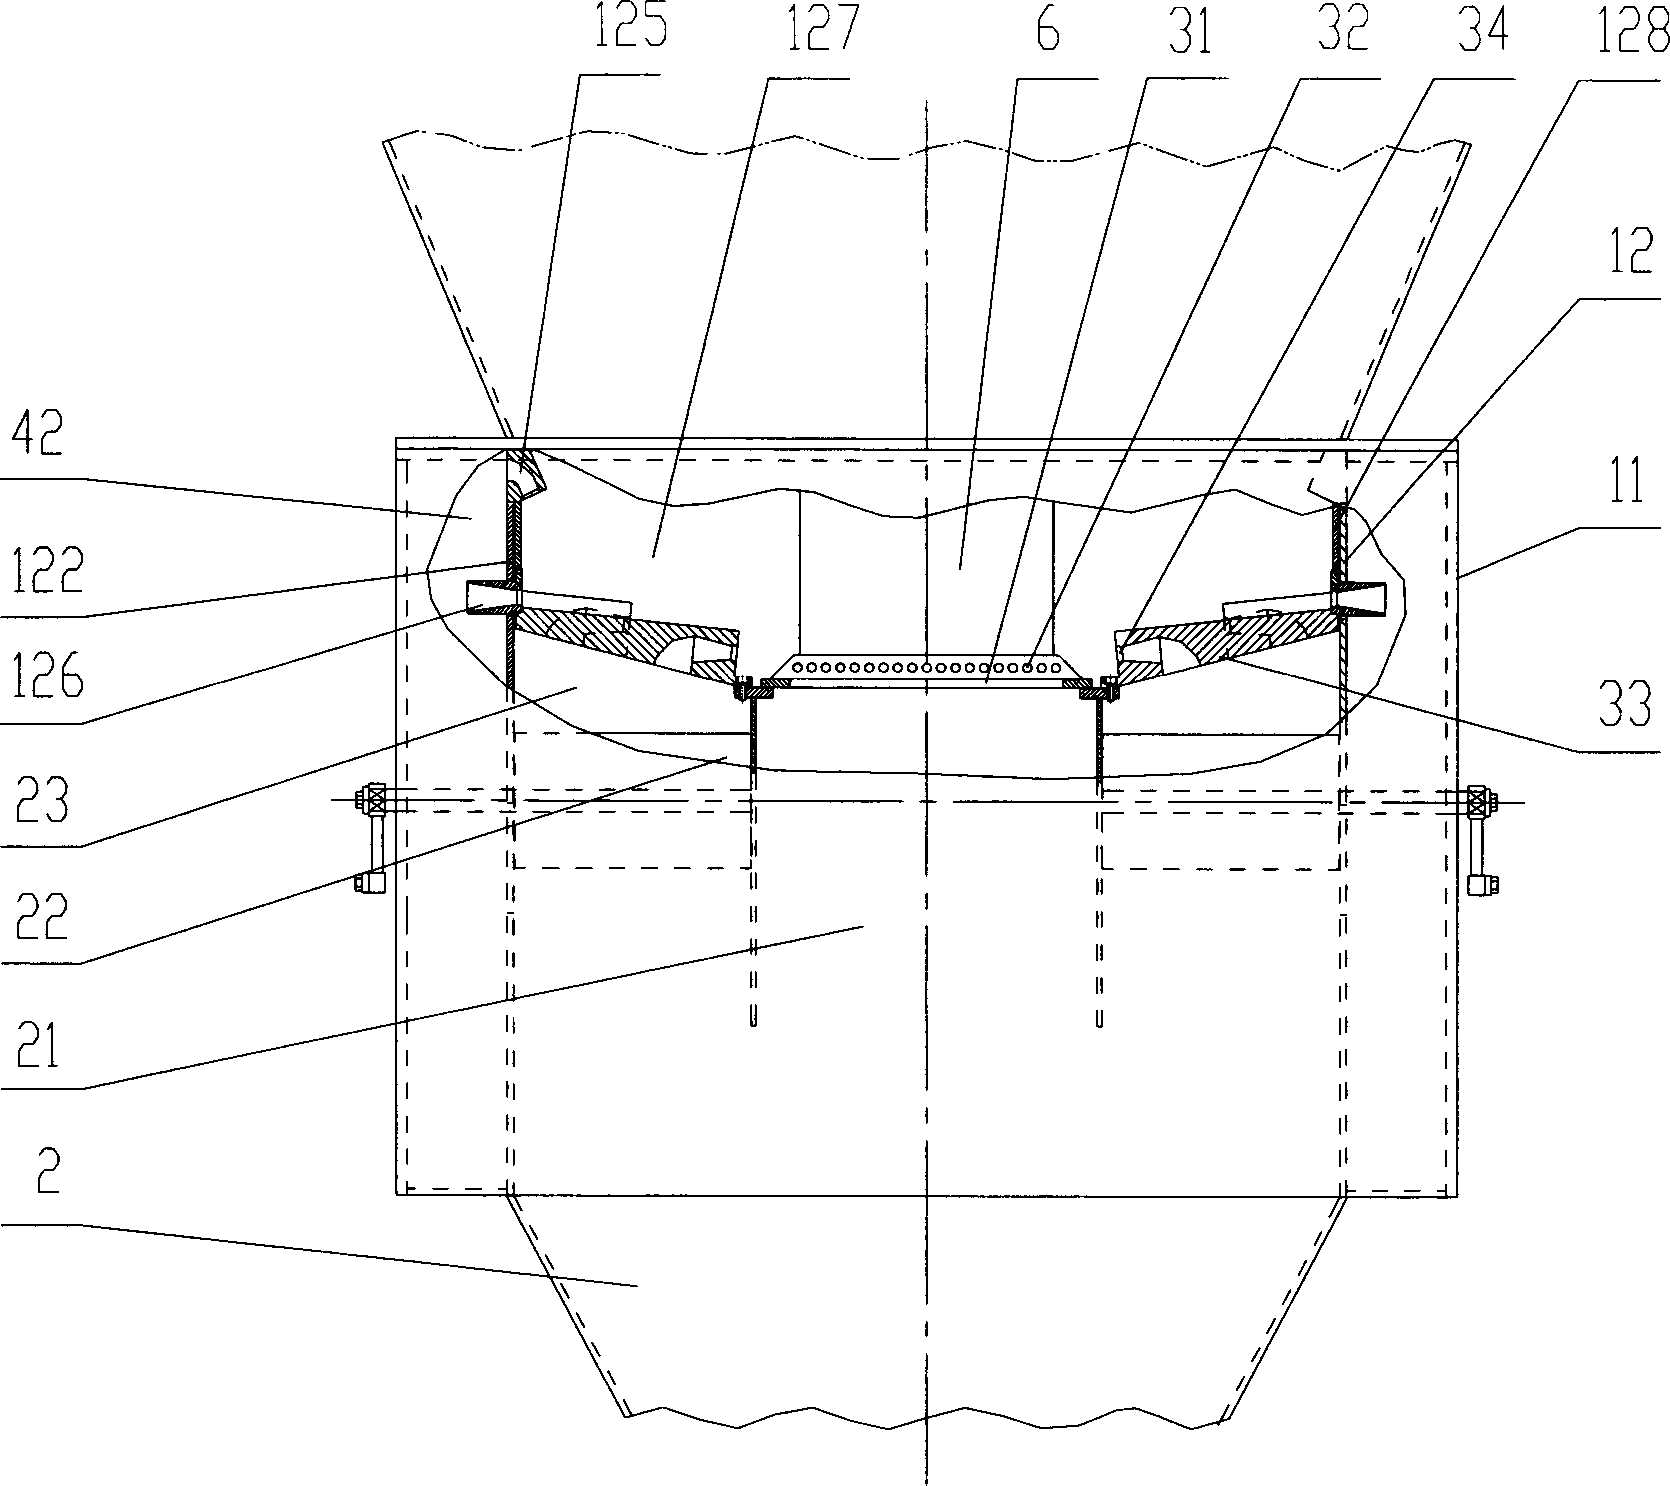 Bed structure of boiling swirling fluidized bed